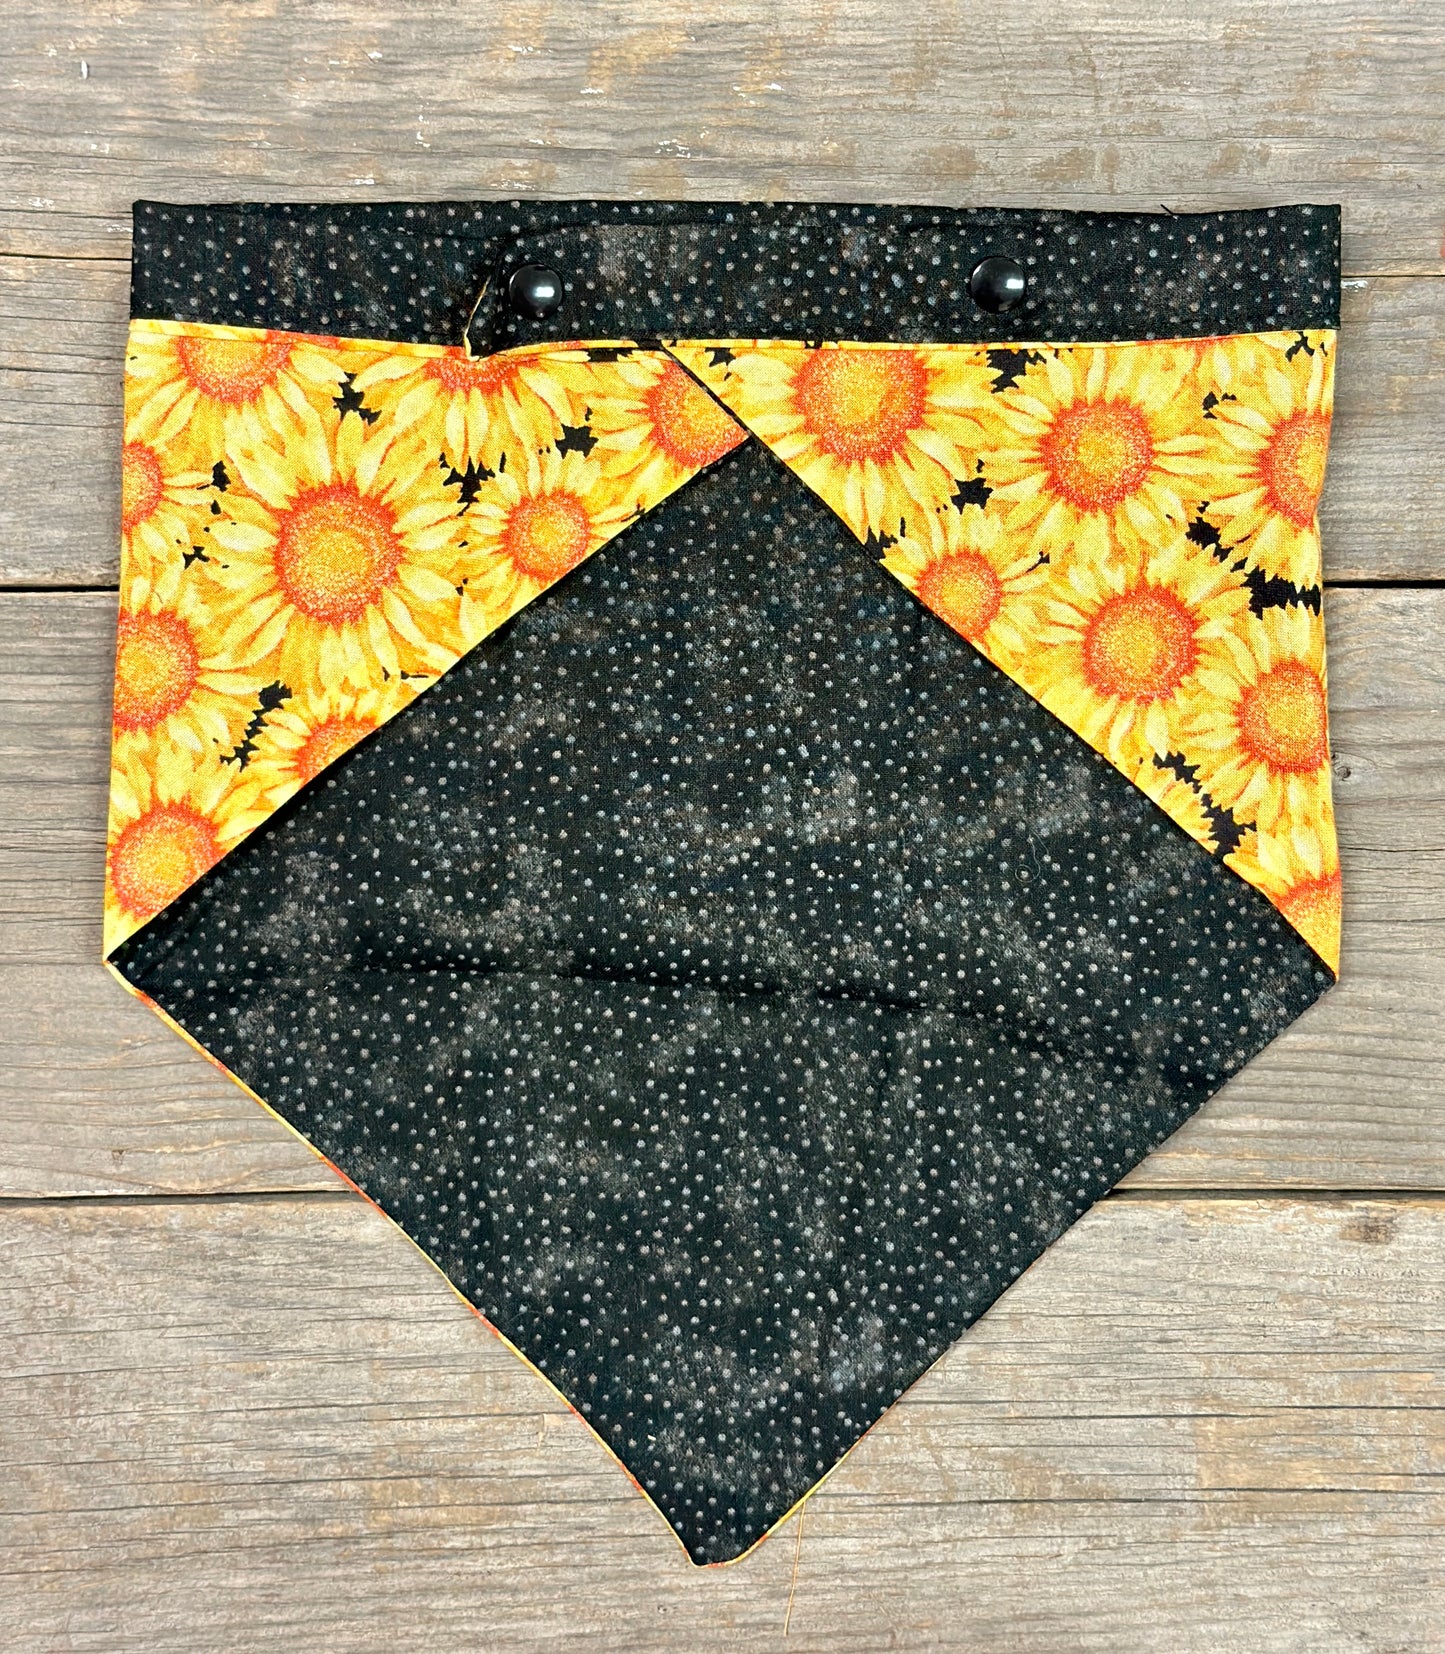 Double-Sided Dog Bandanna - Sunny Days With Coordinating Black and Grey Polka Dots